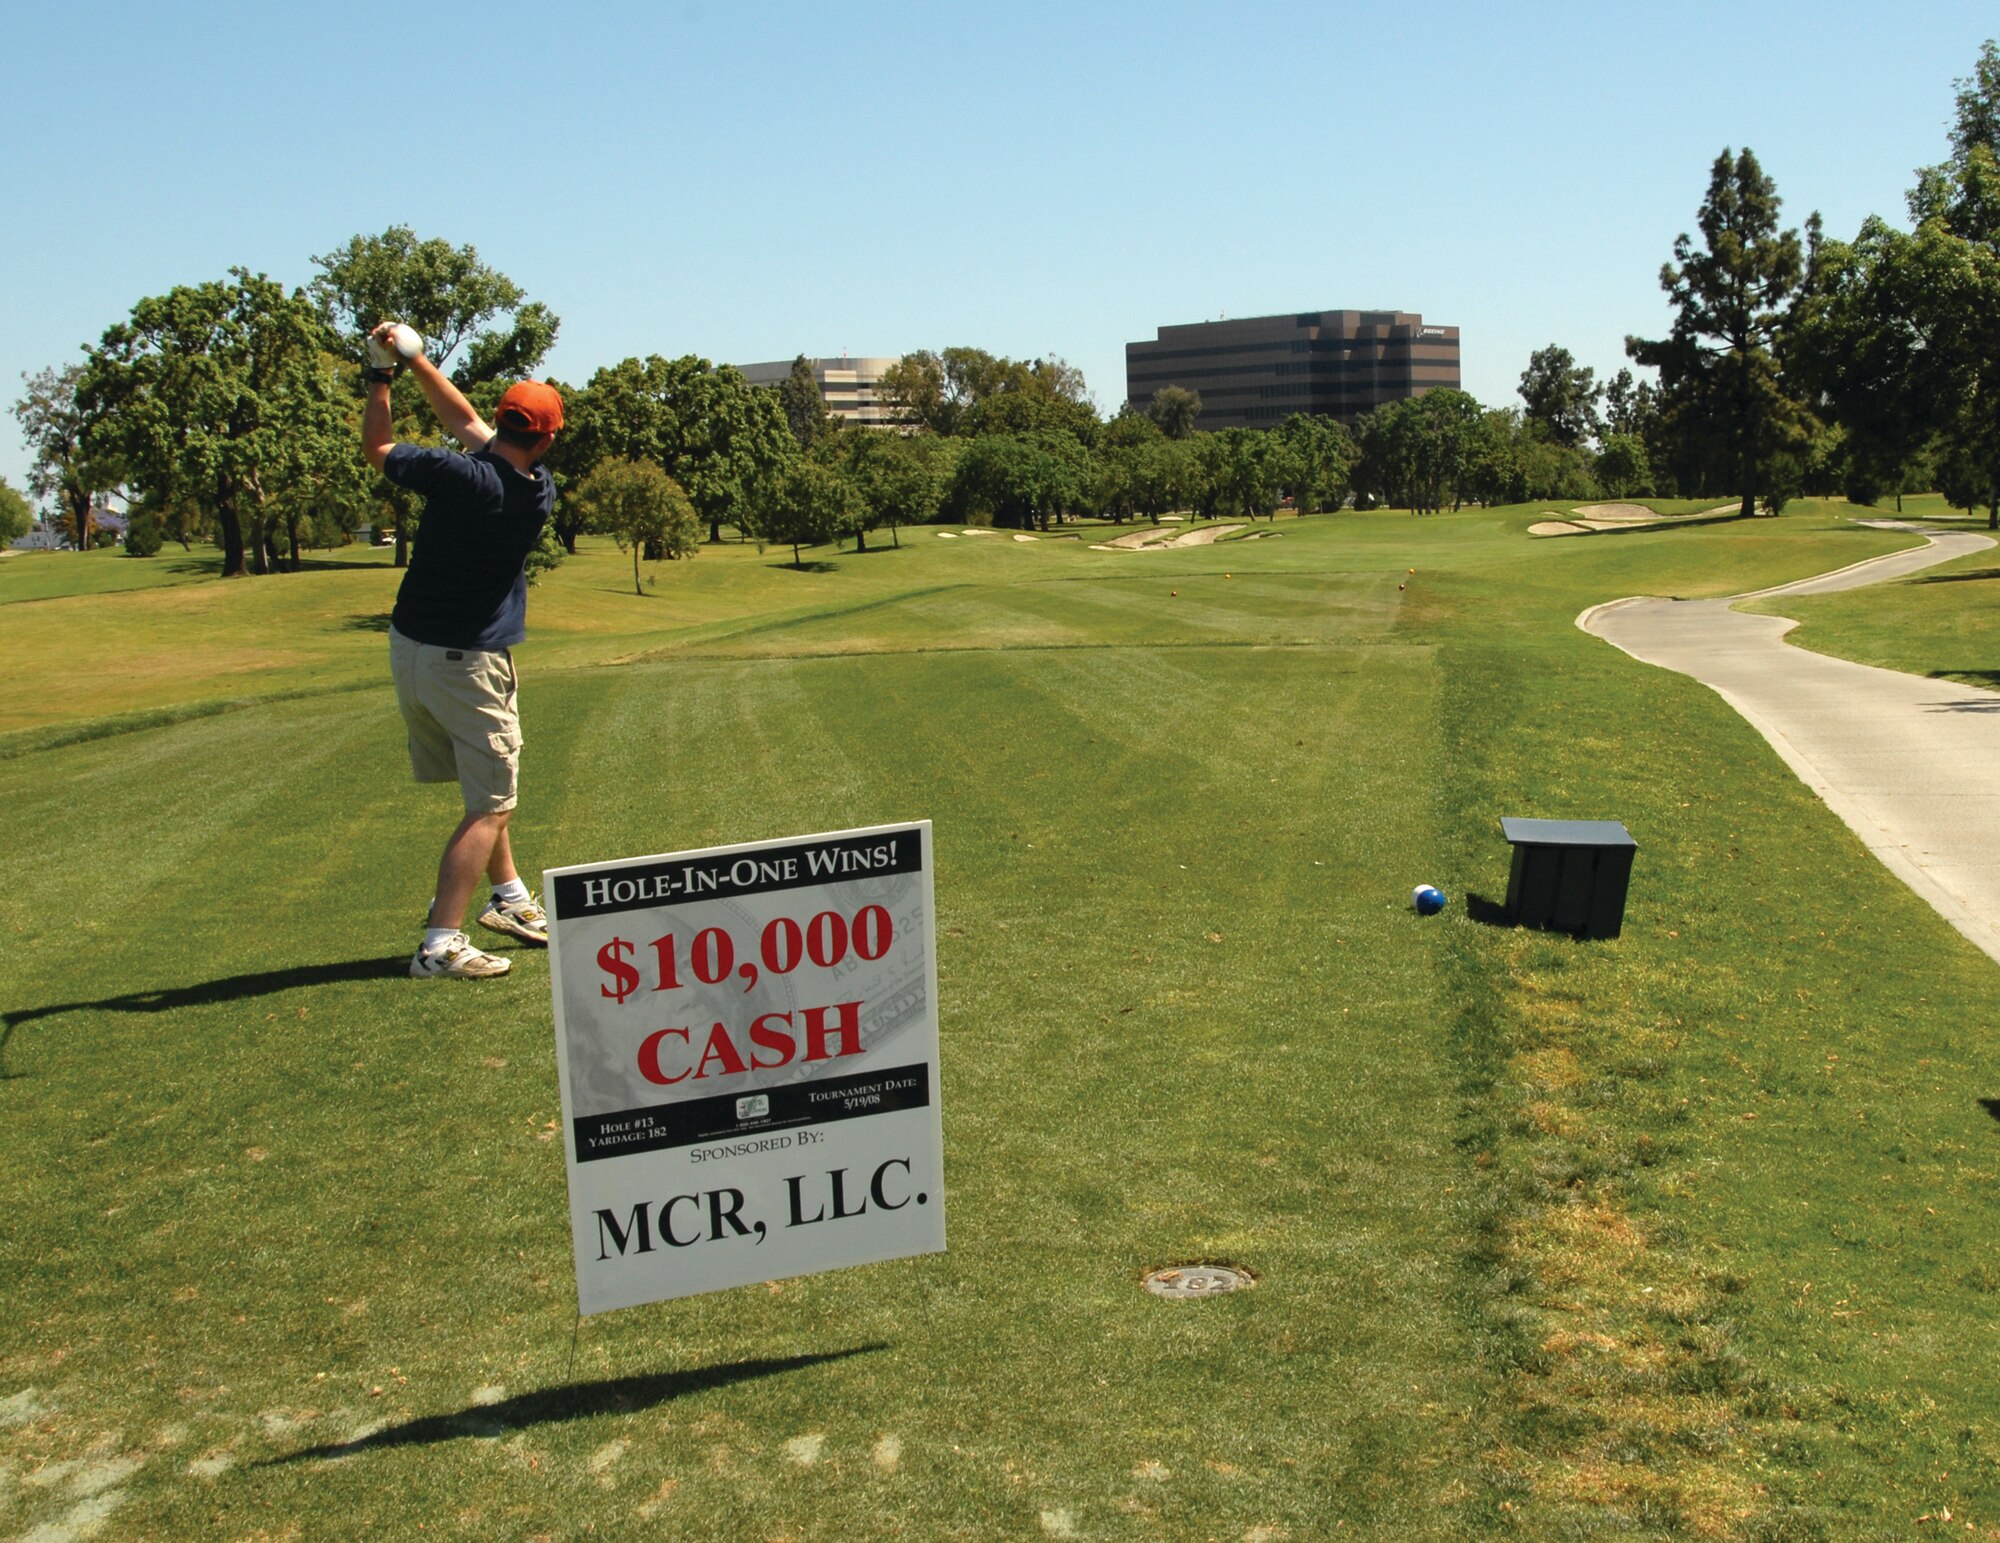 A participant demonstrates his tee drive at the $10,000 hole-in-one sponored by MCR Inc. during the GPS Partnership Council golf tournament. (photo by Joe Juarez)